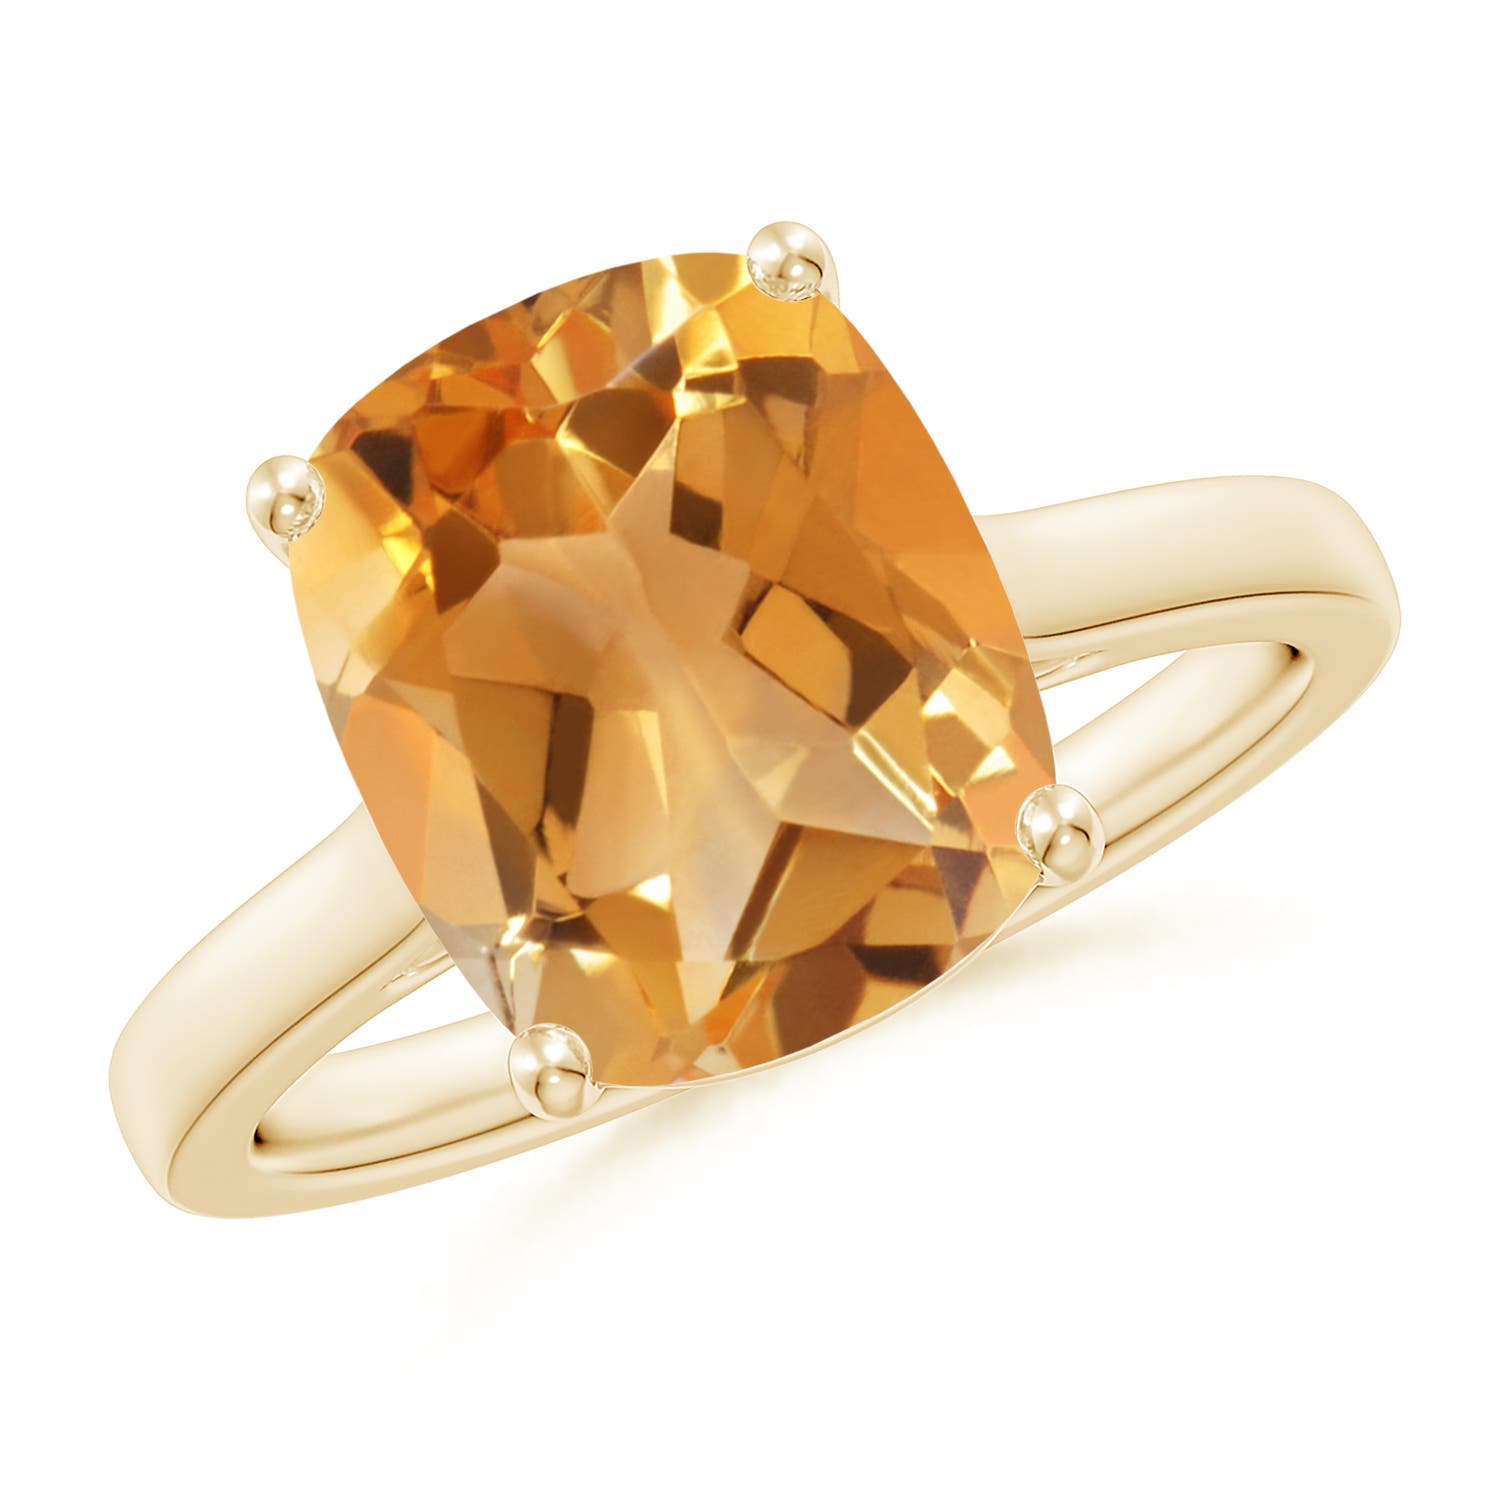 A - Citrine / 3.73 CT / 14 KT Yellow Gold